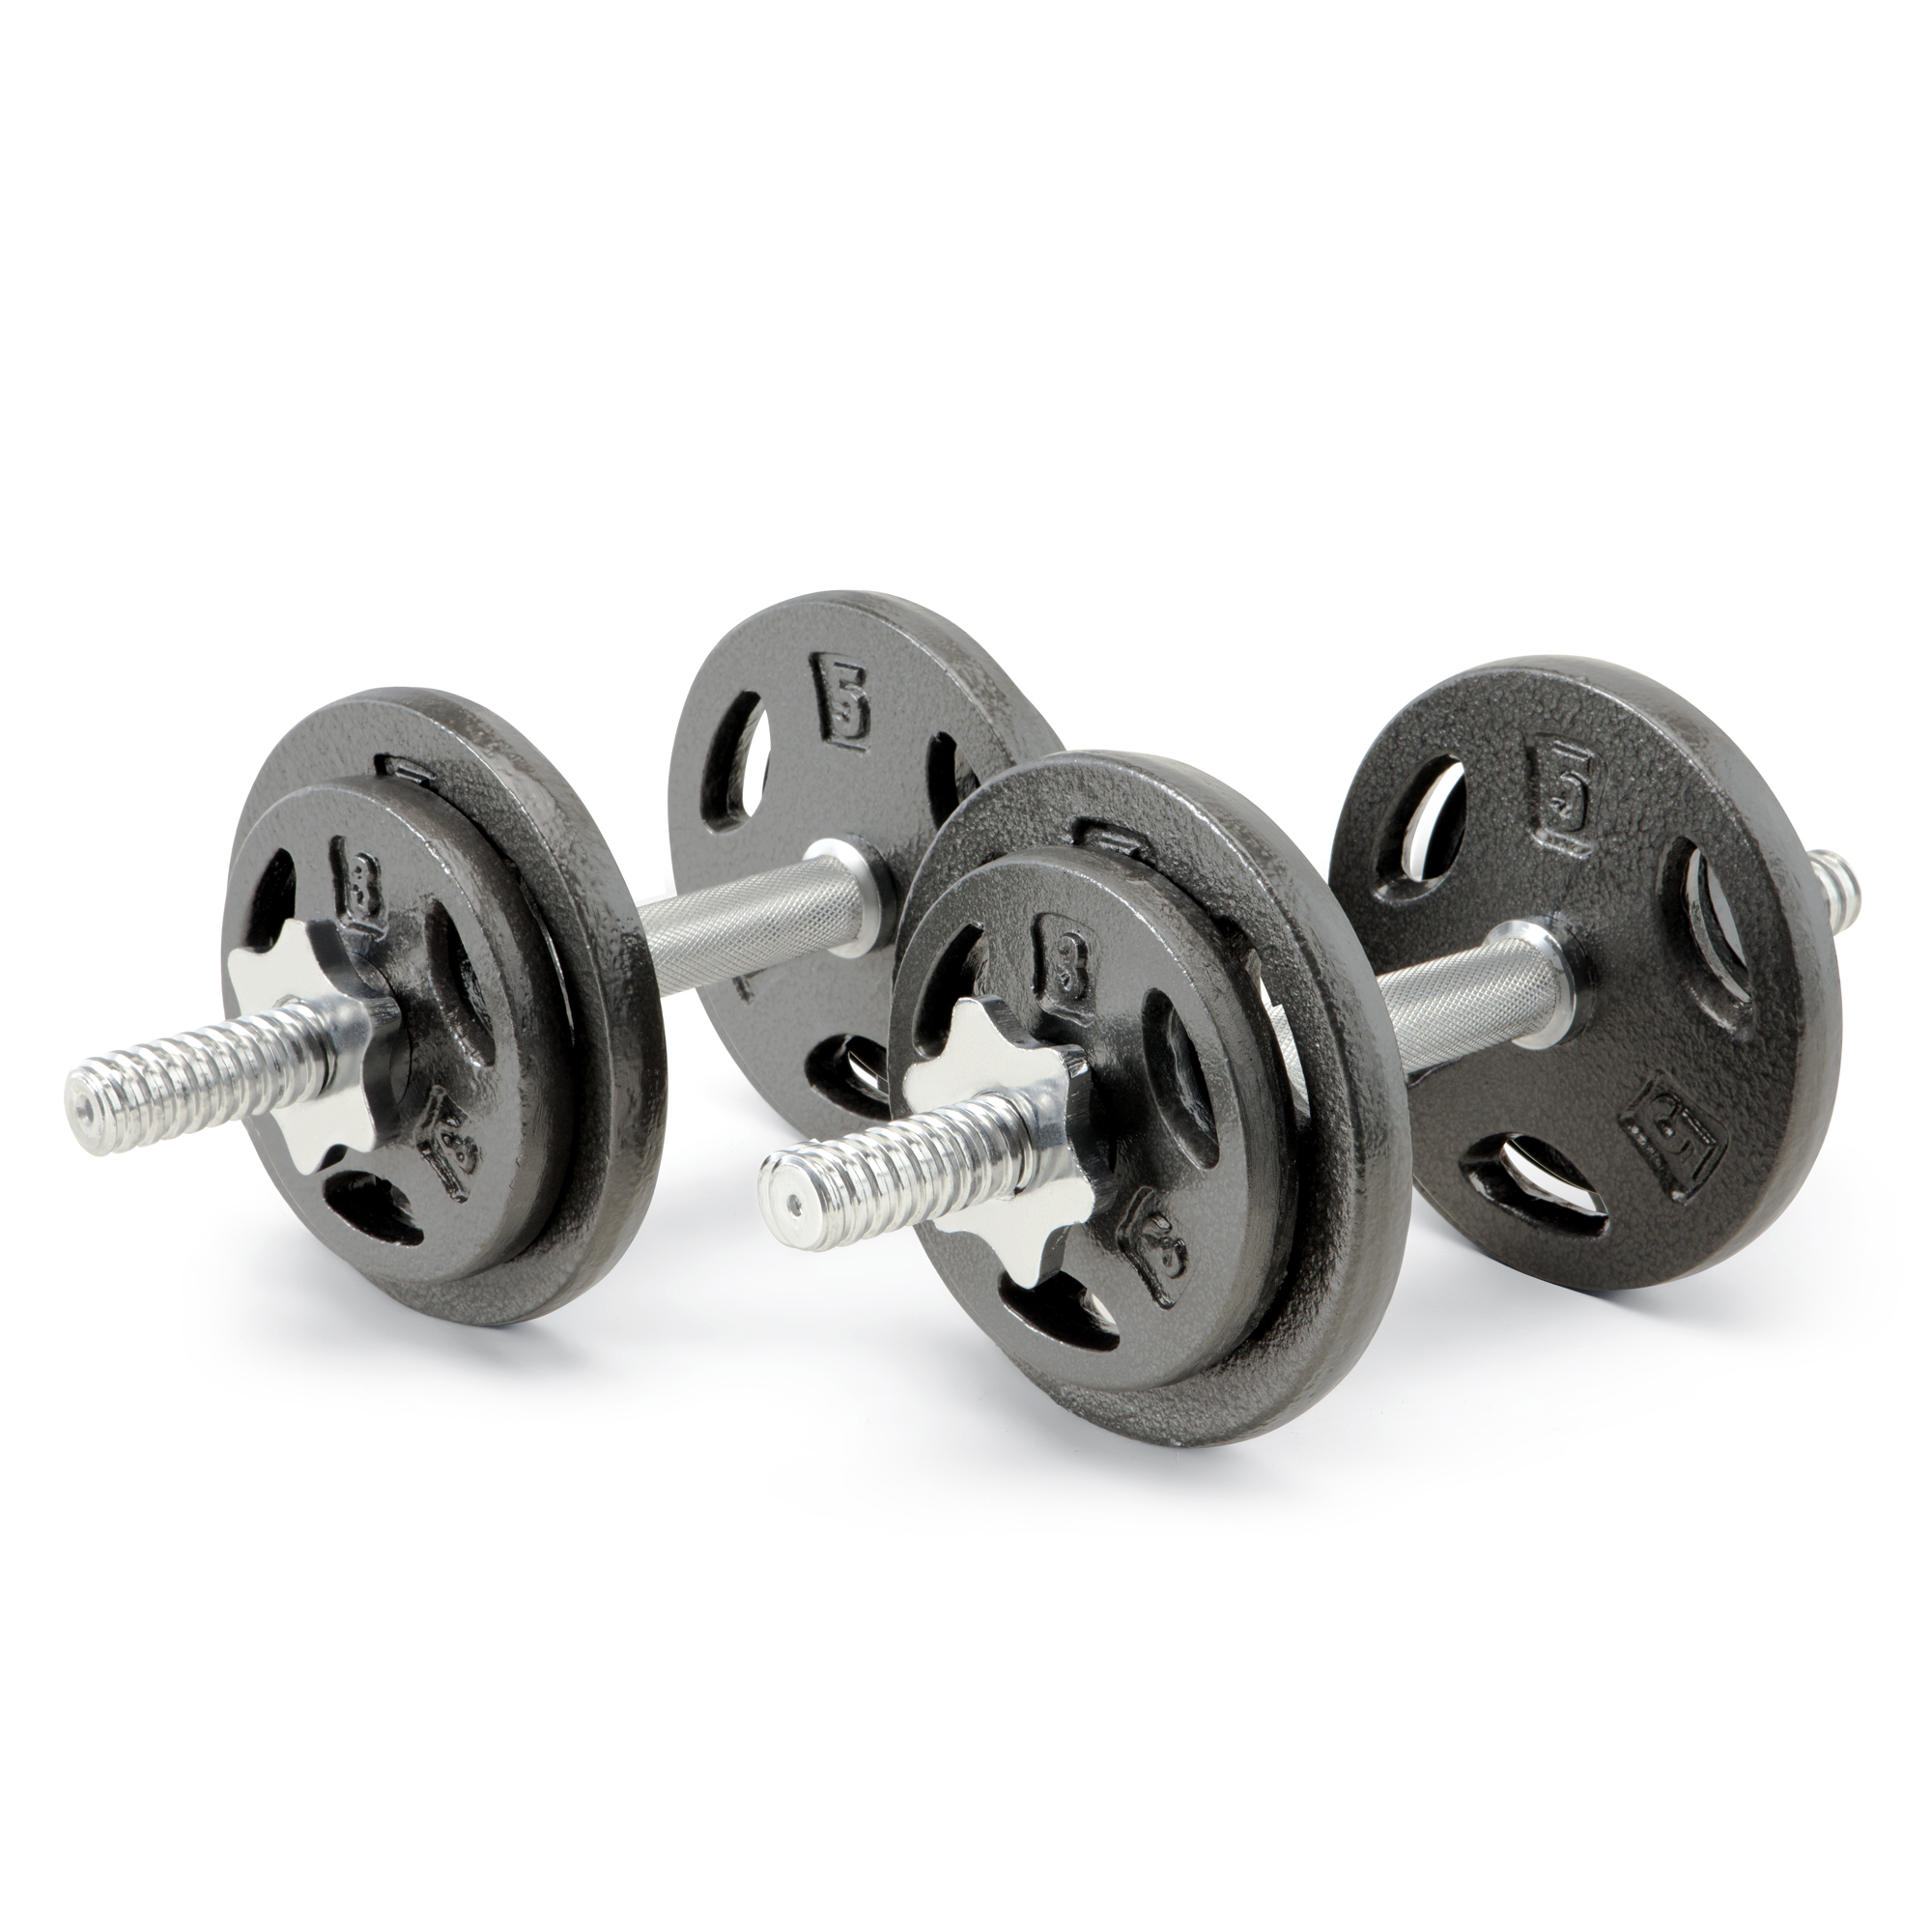 Marcy 40 lbs. Adjustable Dumbbell Set with Carrying Case ADS-42 - image 2 of 6